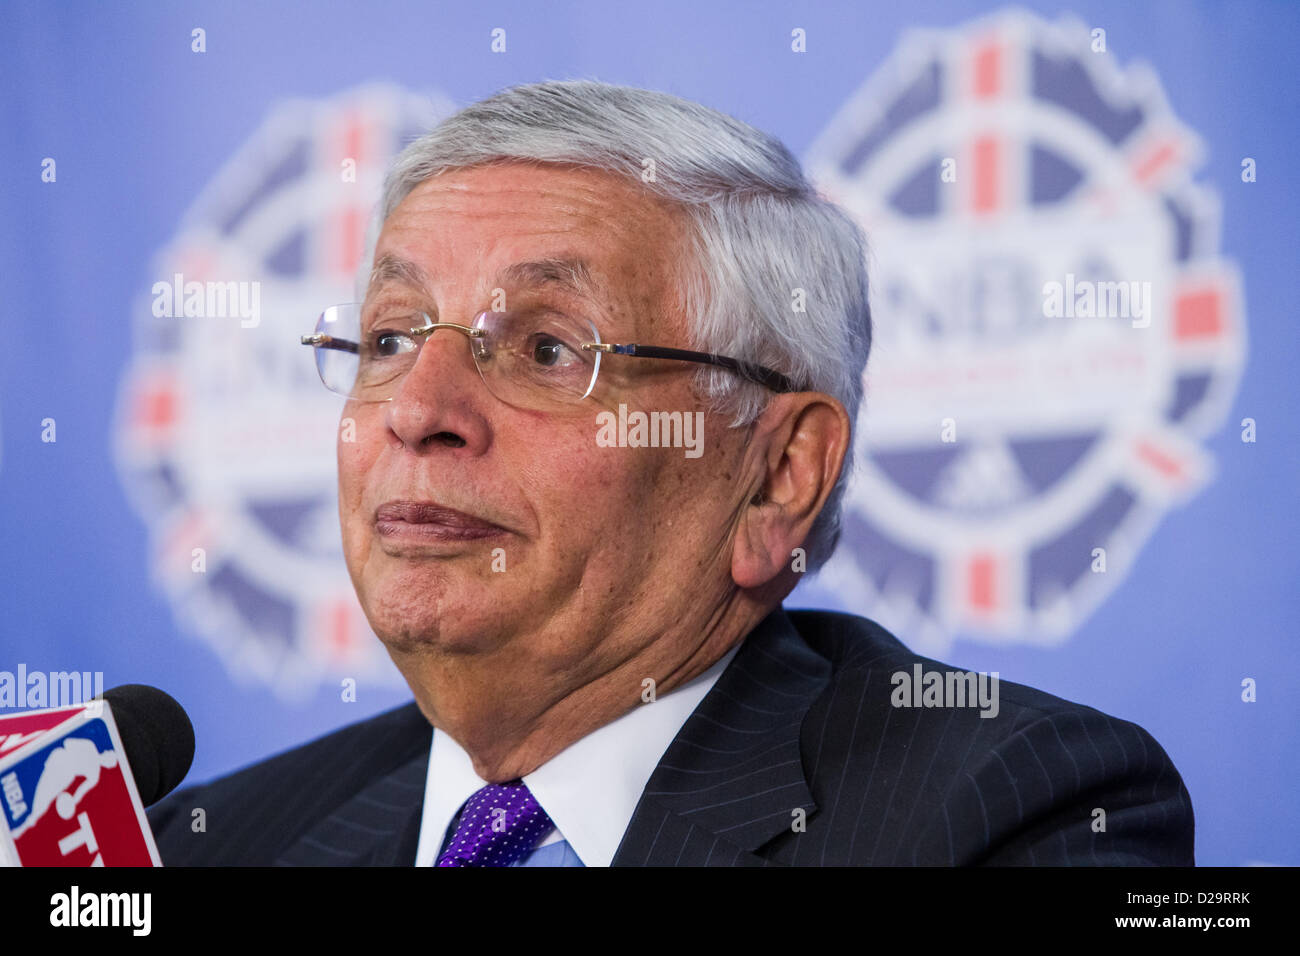 17.01.2013 London, England. NBA Commissioner David Stern talking to the press ahead of the NBA London Live 2013 game between the Detroit Pistons and the New York Knicks from The O2 Arena Stock Photo